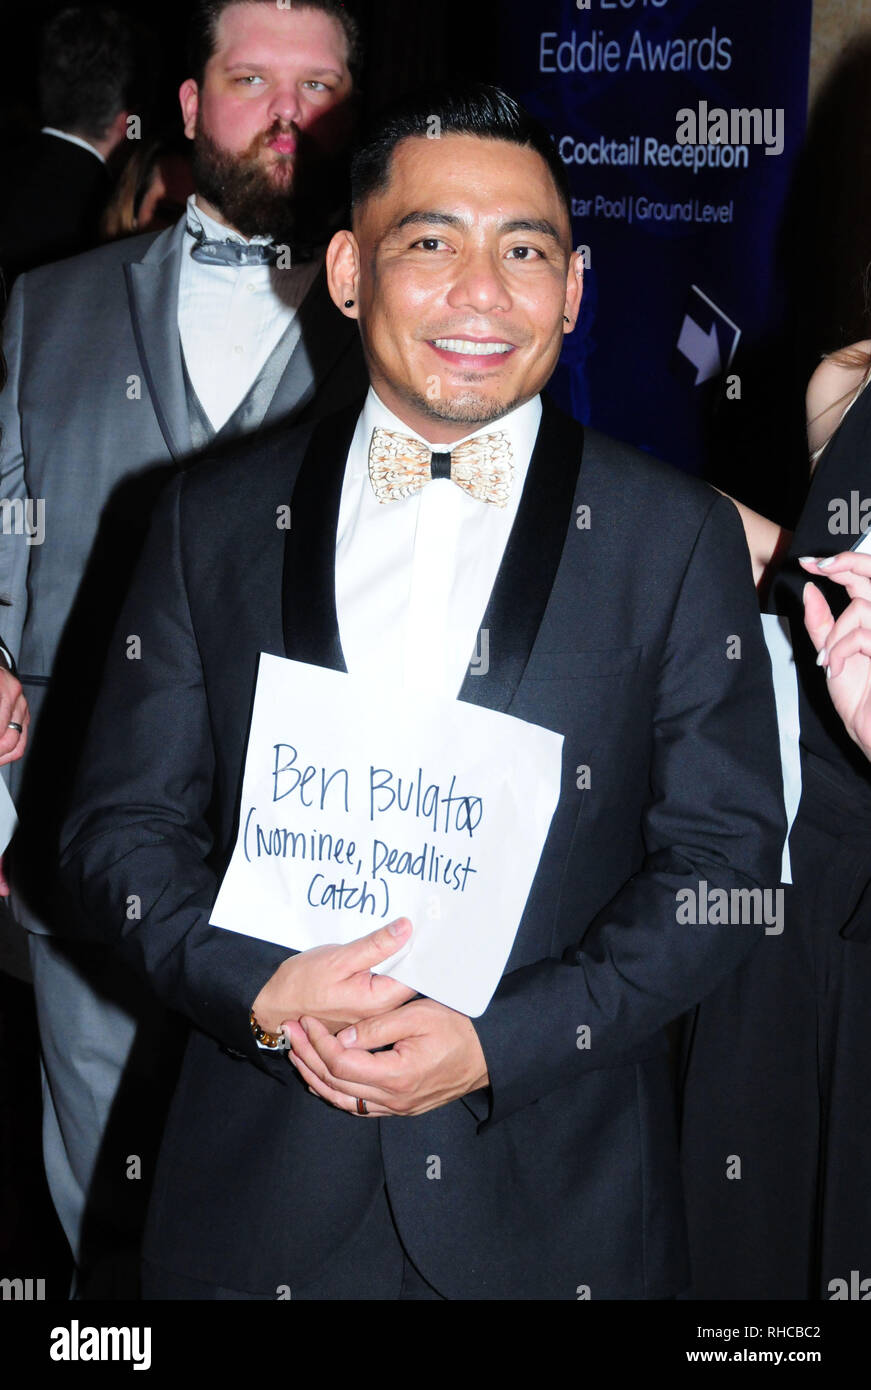 BEVERLY HILLS, CA - FEBRUARY 1: Editor Ben Bulatao attends ACE 69th Annual Eddie Awards on February 1, 2019 at the Beverly Hilton Hotel in Beverly Hills, California. Photo by Barry King/Alamy Stock Photo Stock Photo